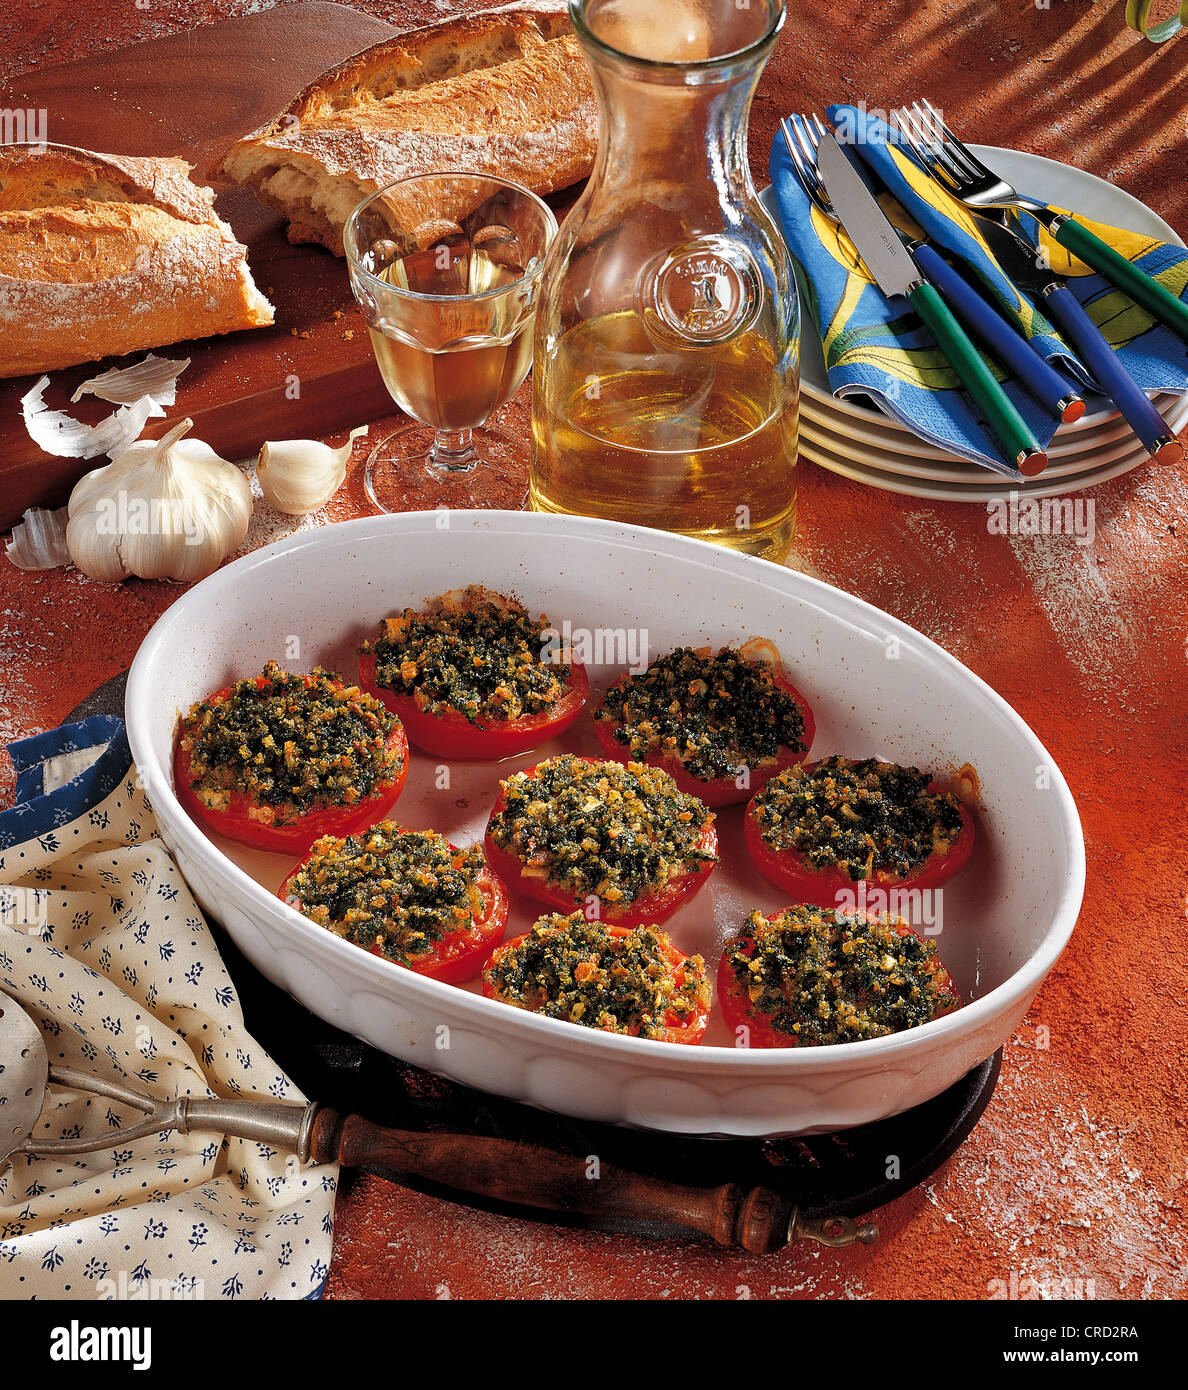 Gratin of tomato and vegetables, France. Stock Photo